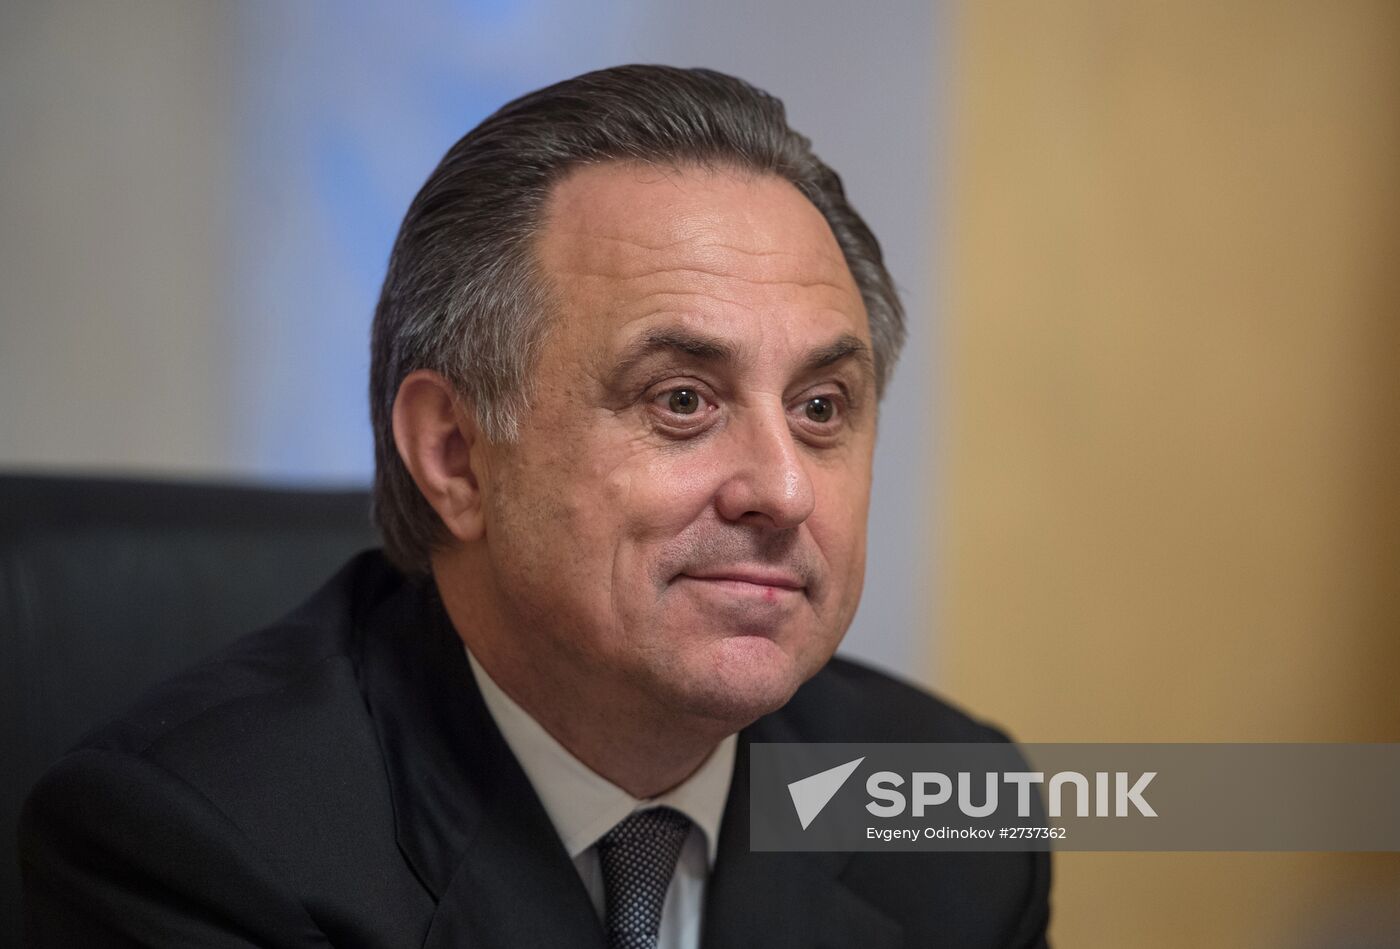 Russian Minister of Sport Vitaly Mutko gives news conference